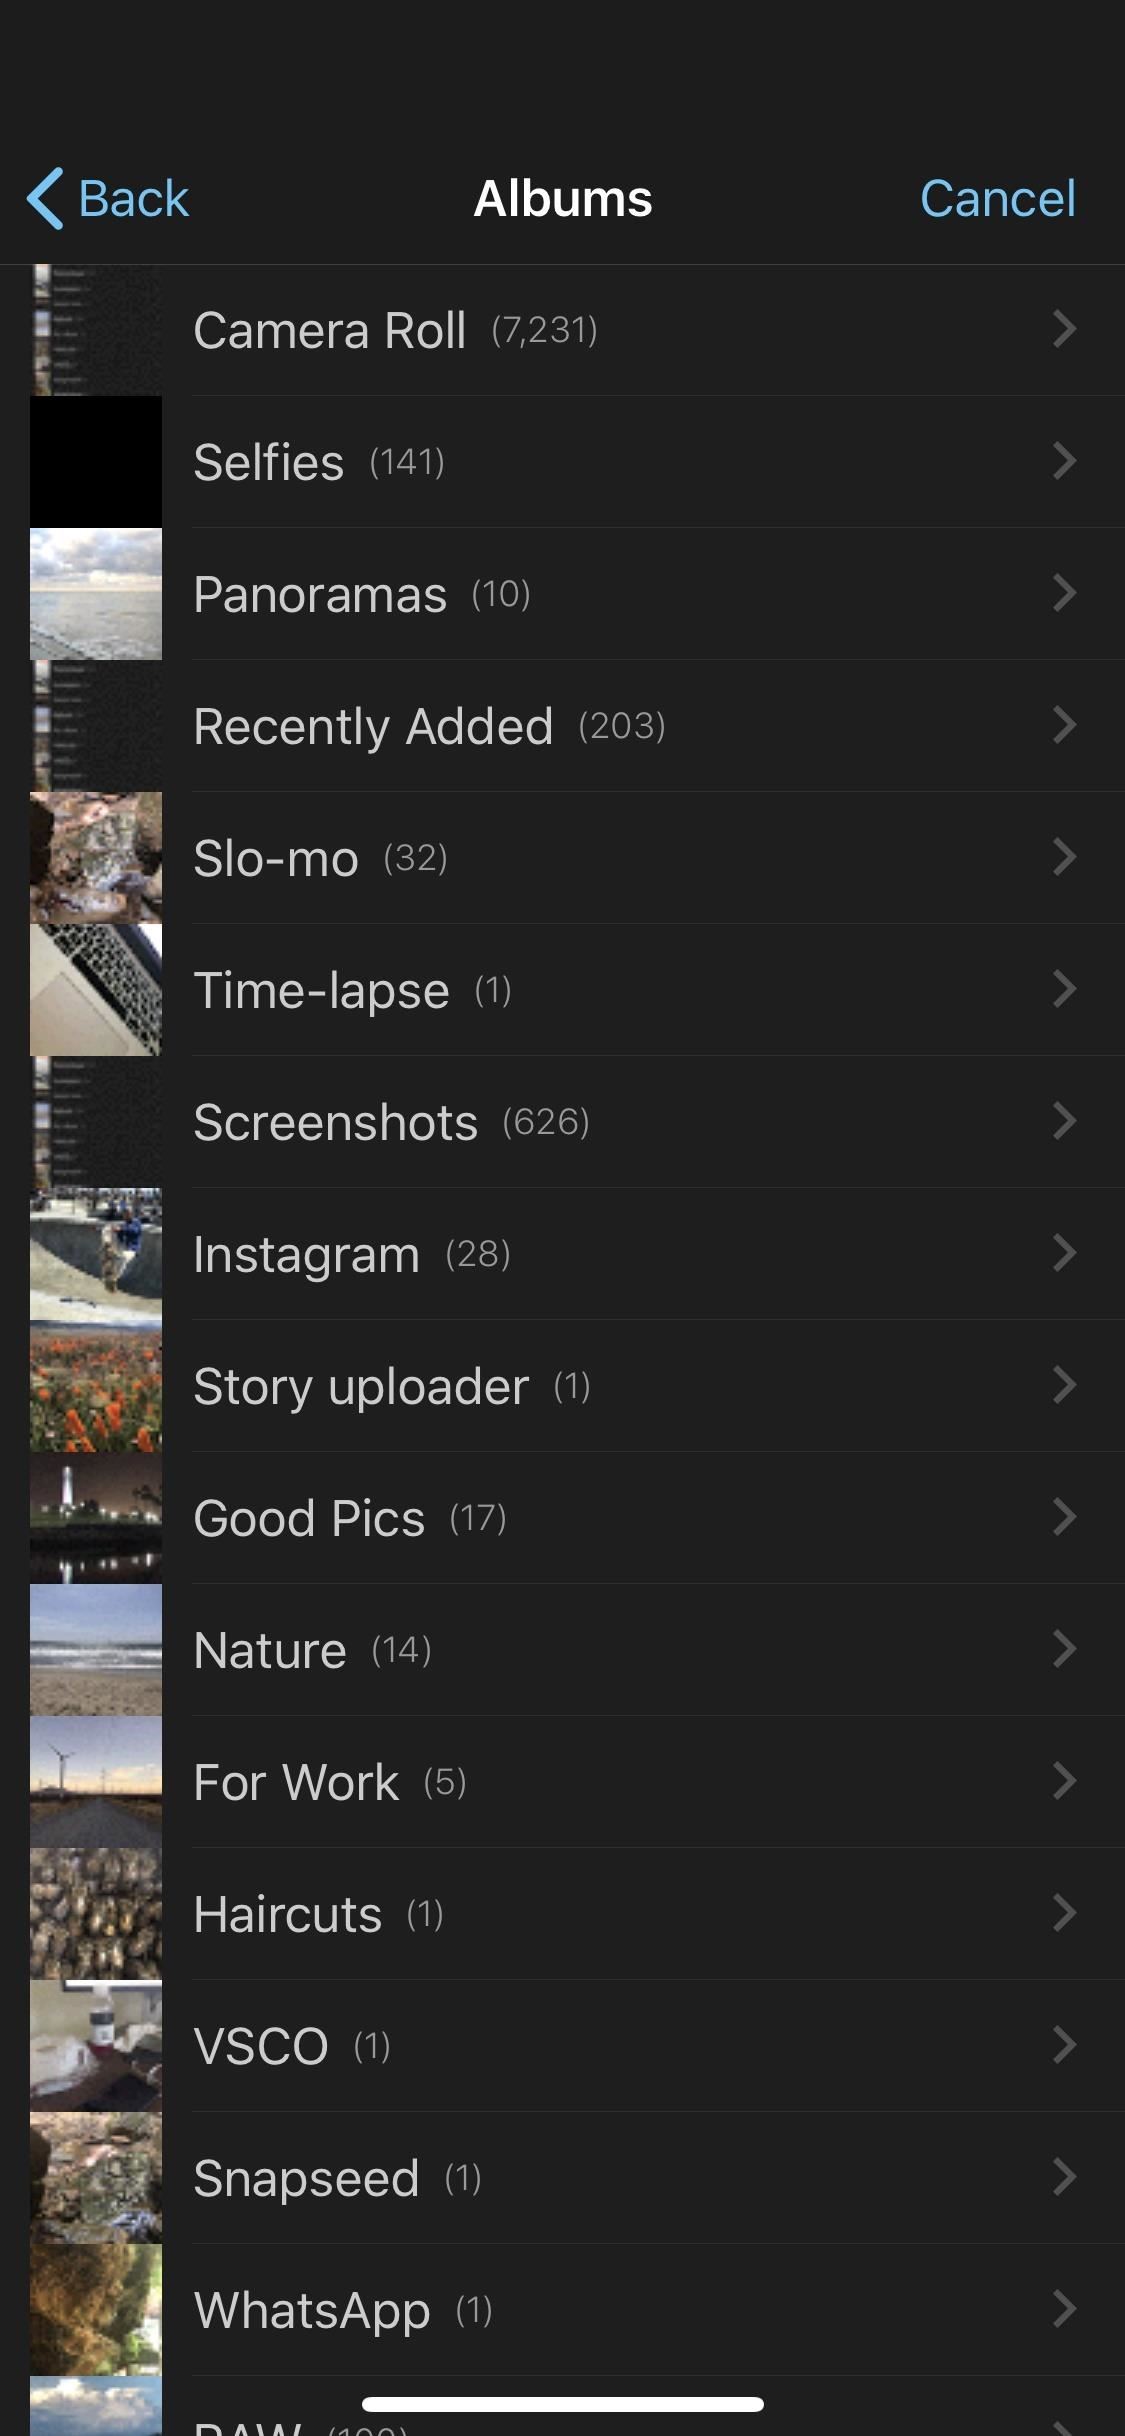 How to Add More Photos to iMovie Projects on Your iPhone